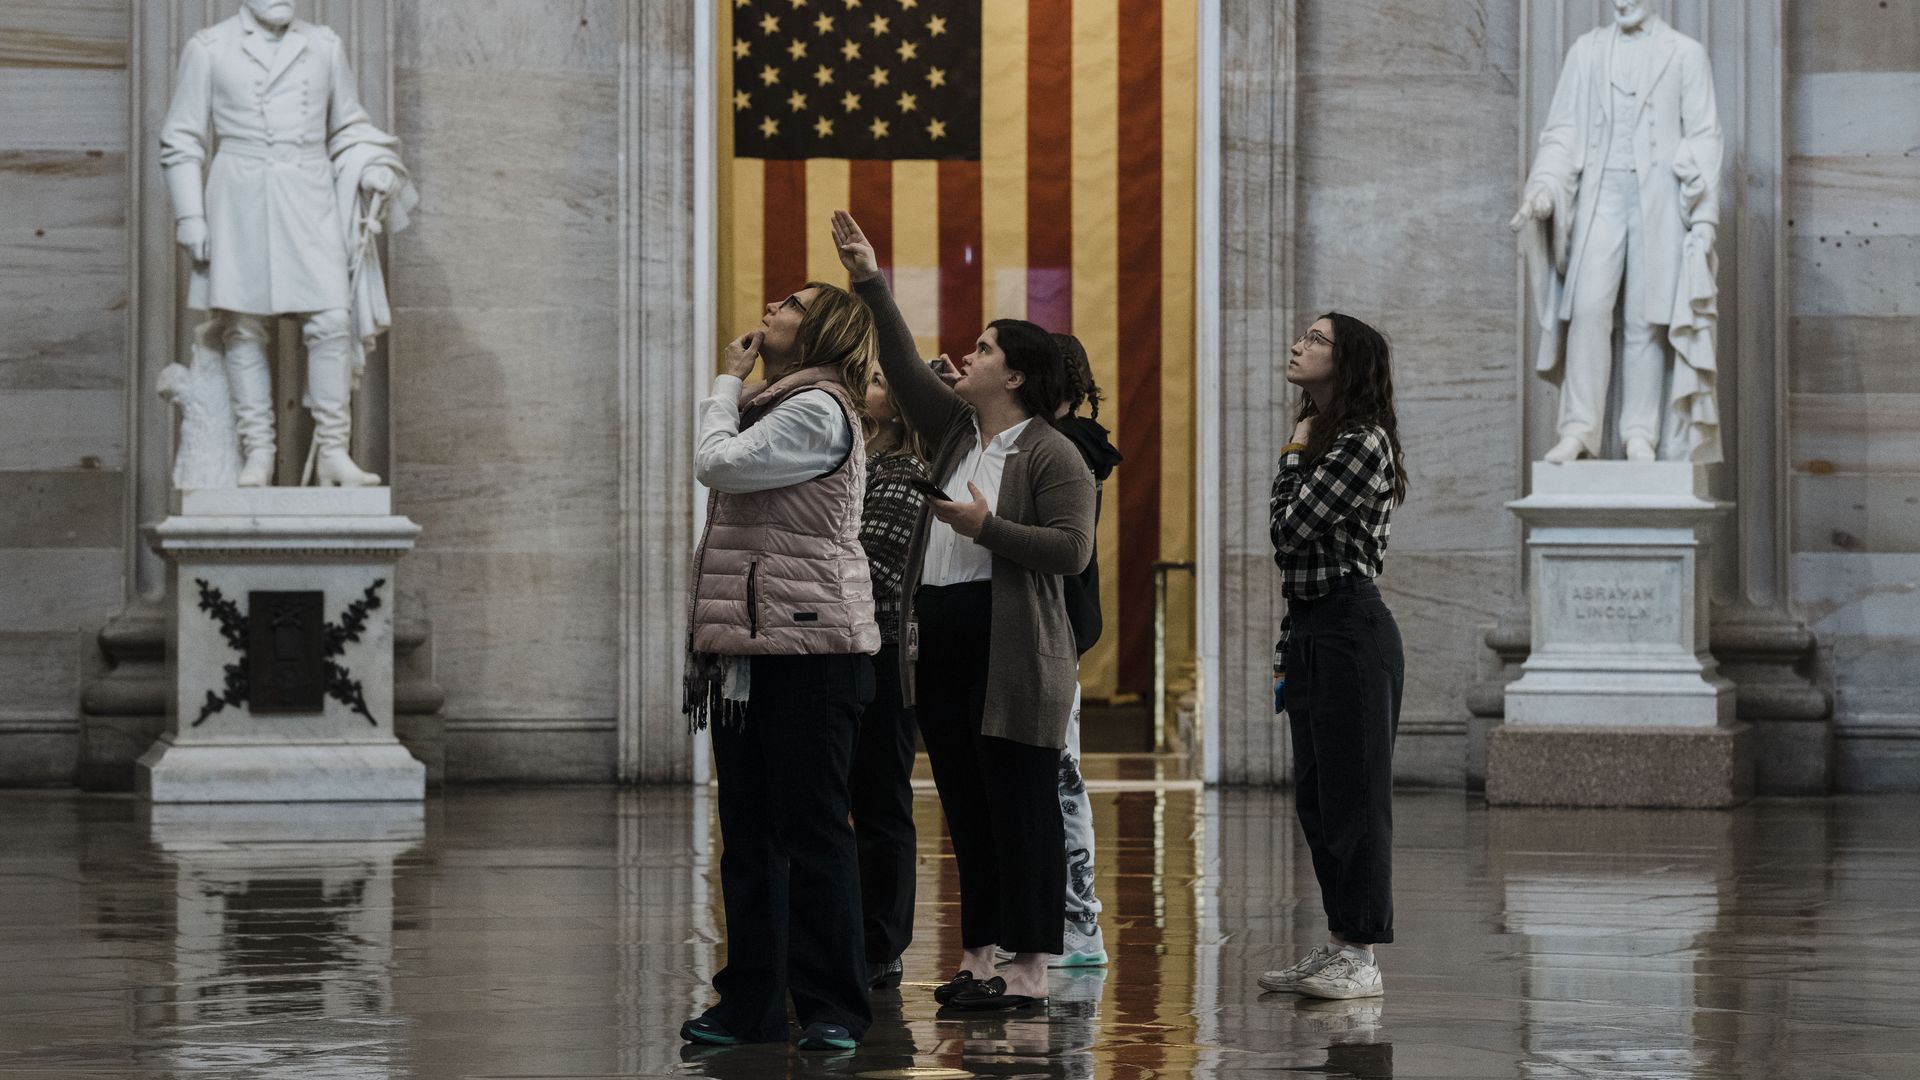 A group of tourists is seen in the U.S. Capitol Rotunda.